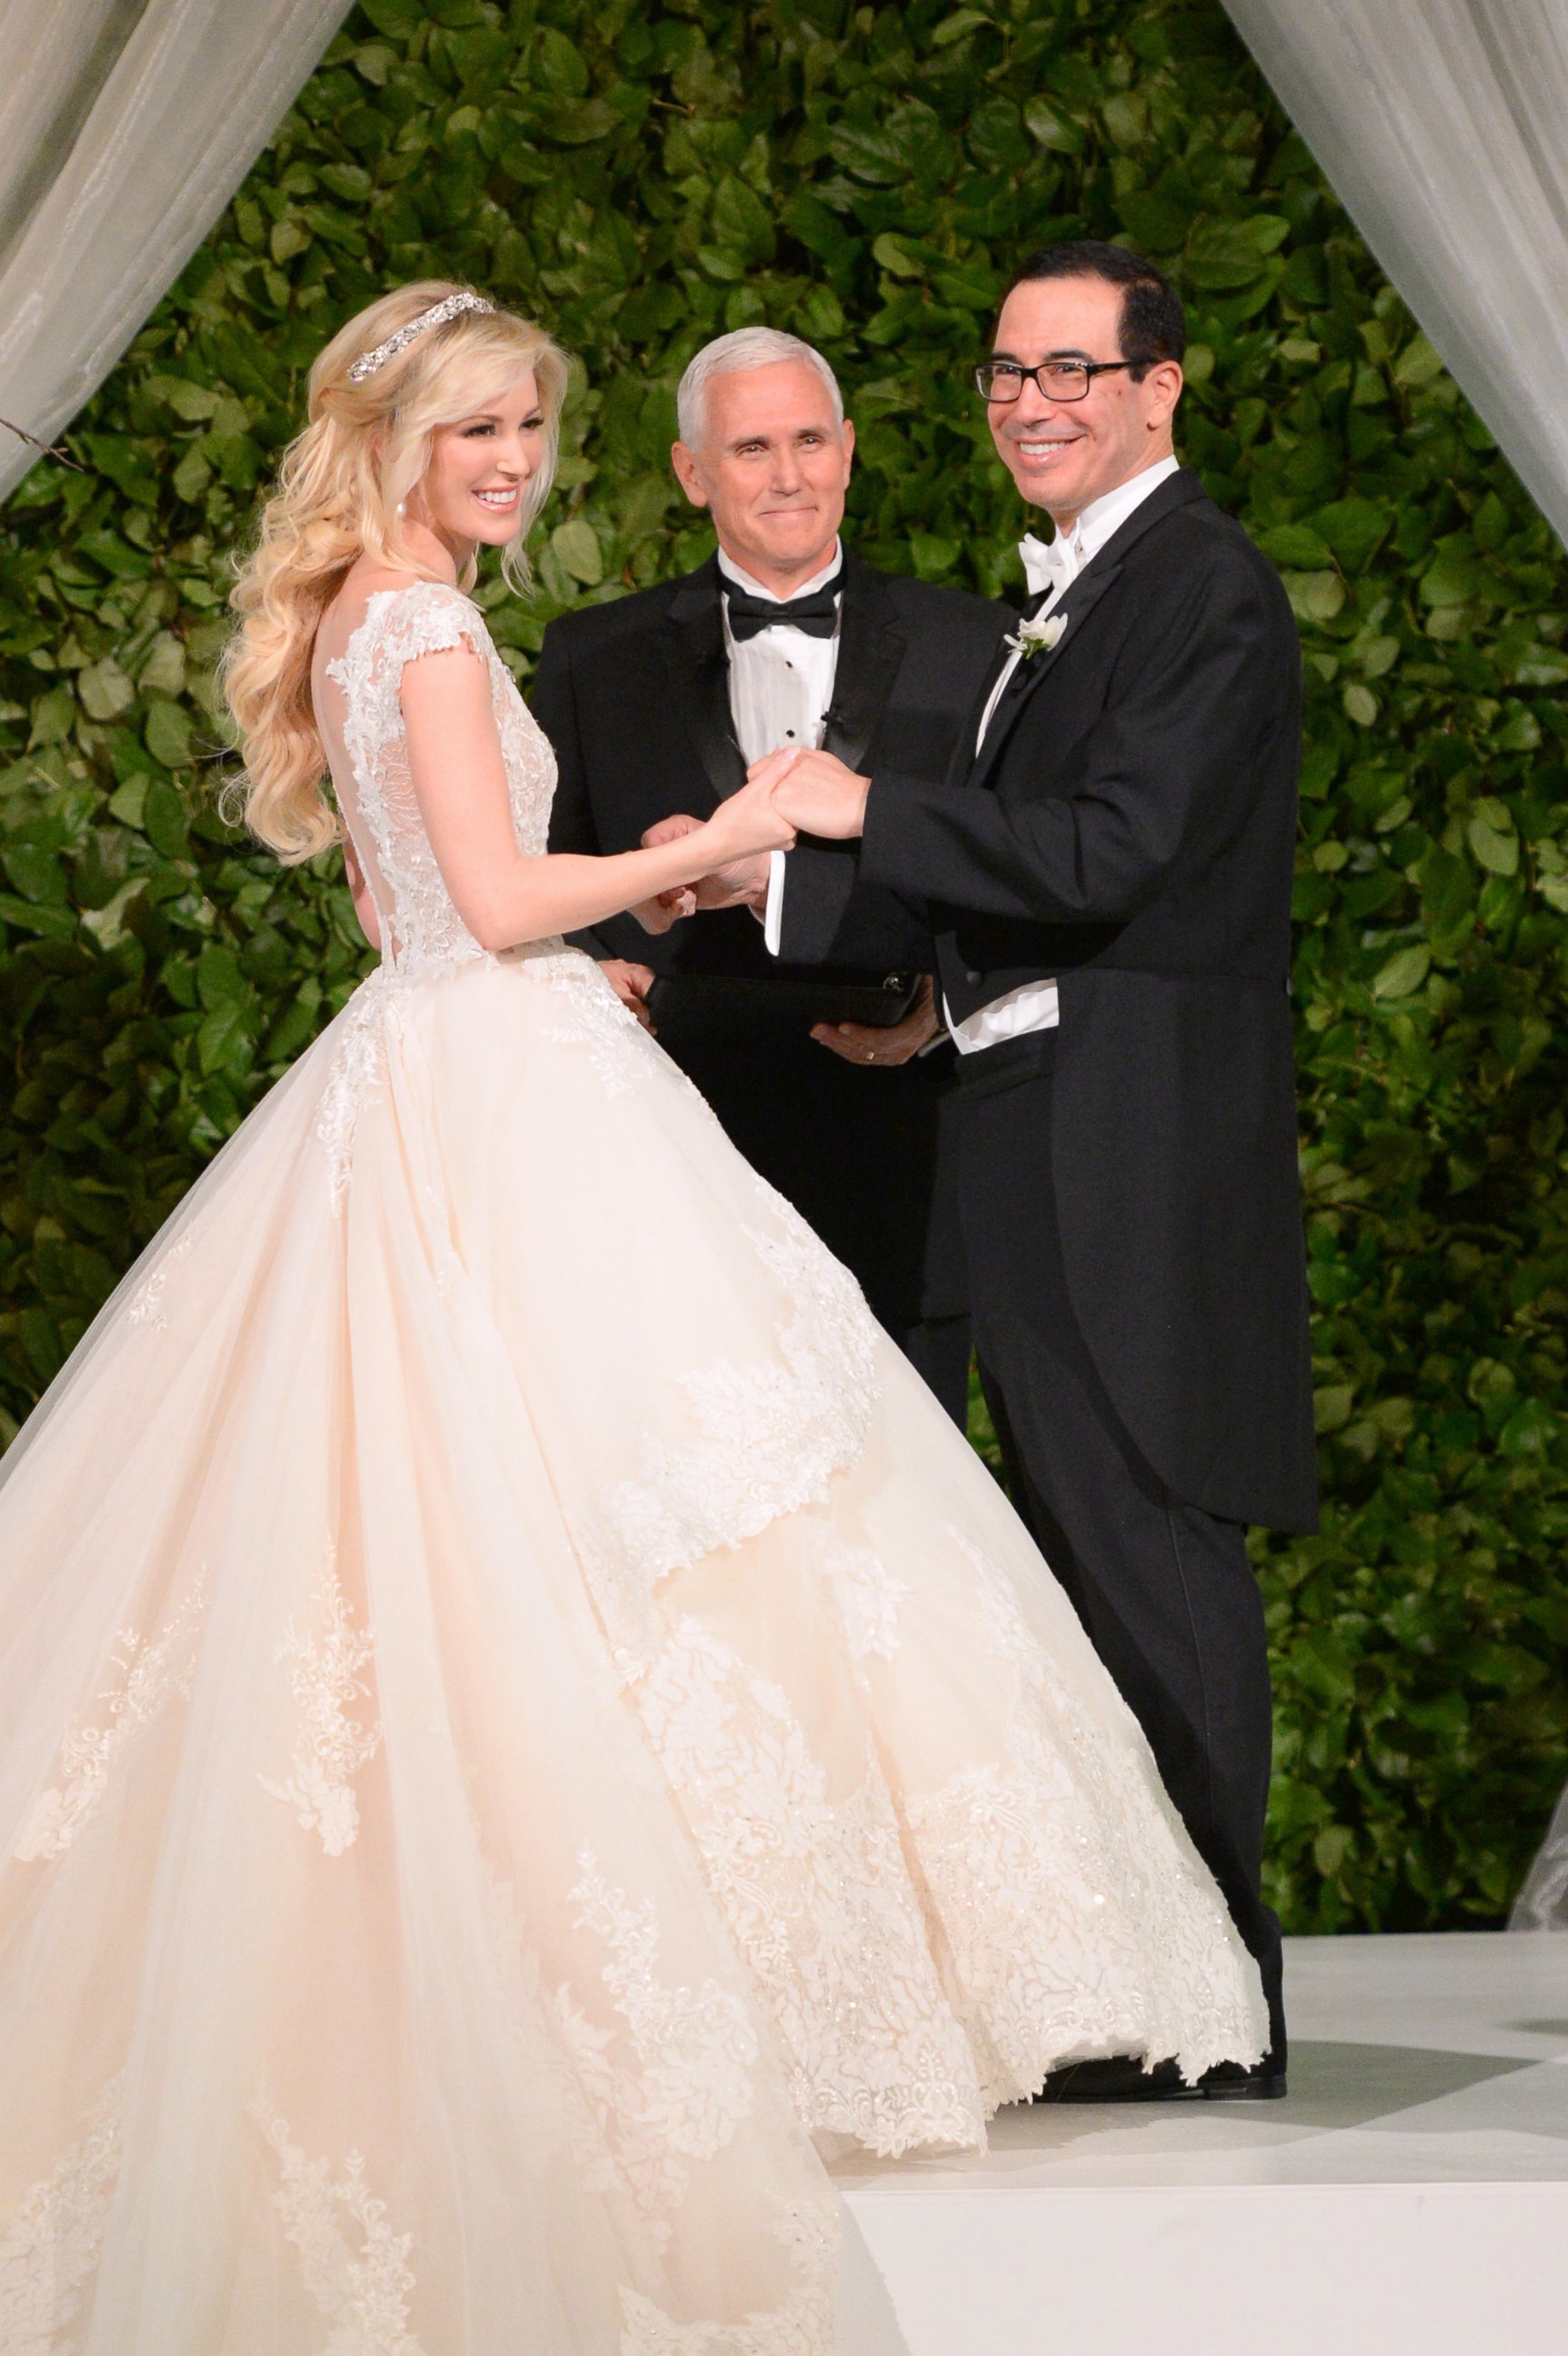 Vice President Mike Pence (C) officiates the wedding of  Louise Linton (L) and Secretary of the Treasury Steven Mnuchin (R) on June 24, 2017 at Andrew Mellon Auditorium in Washington, DC. 